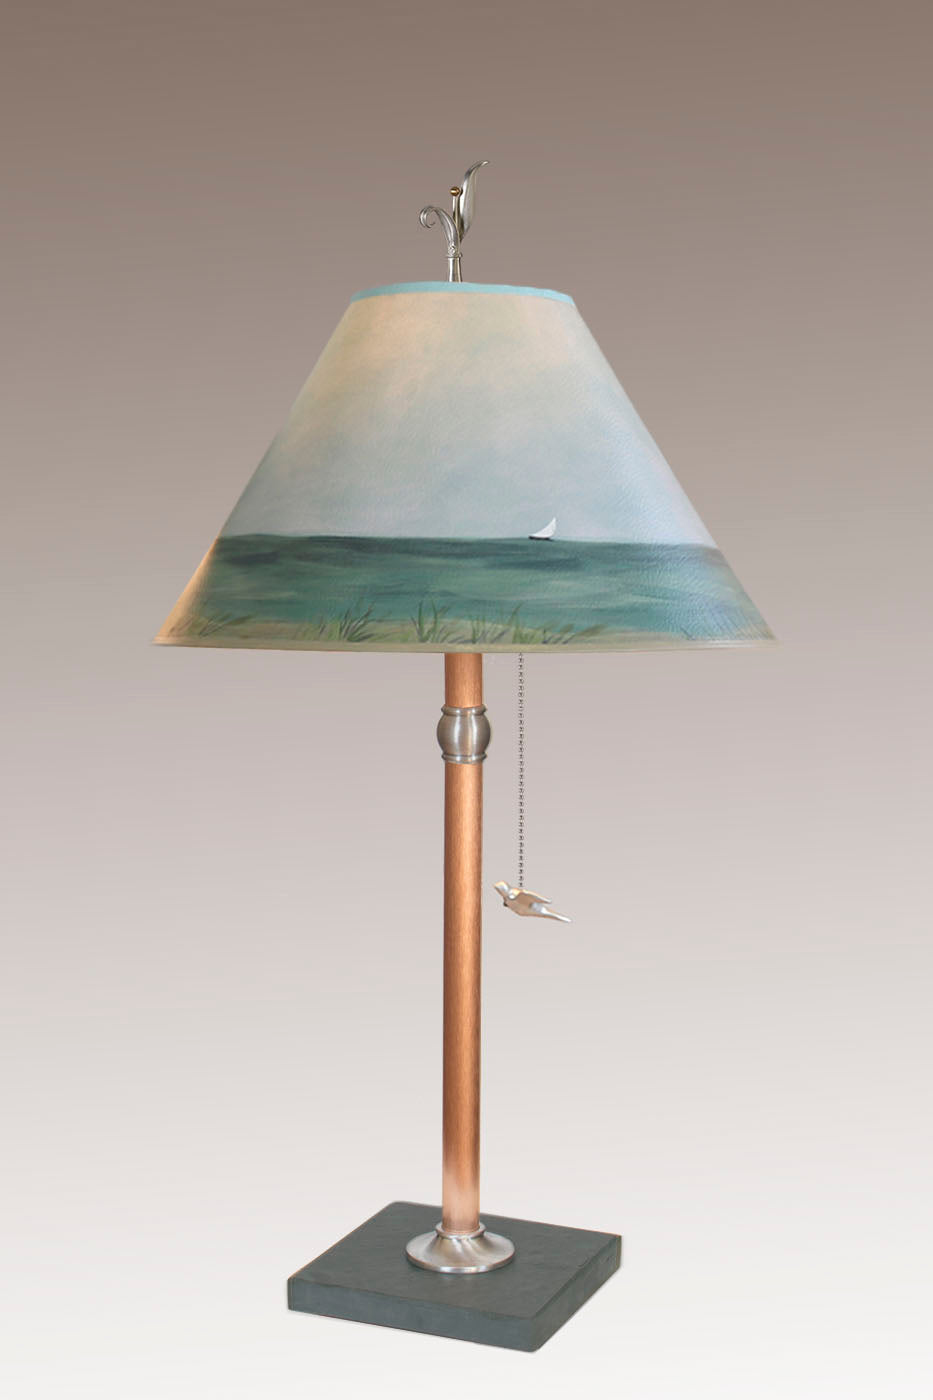 Janna Ugone & Co Table Lamps Copper Table Lamp with Medium Conical Shade in Shore